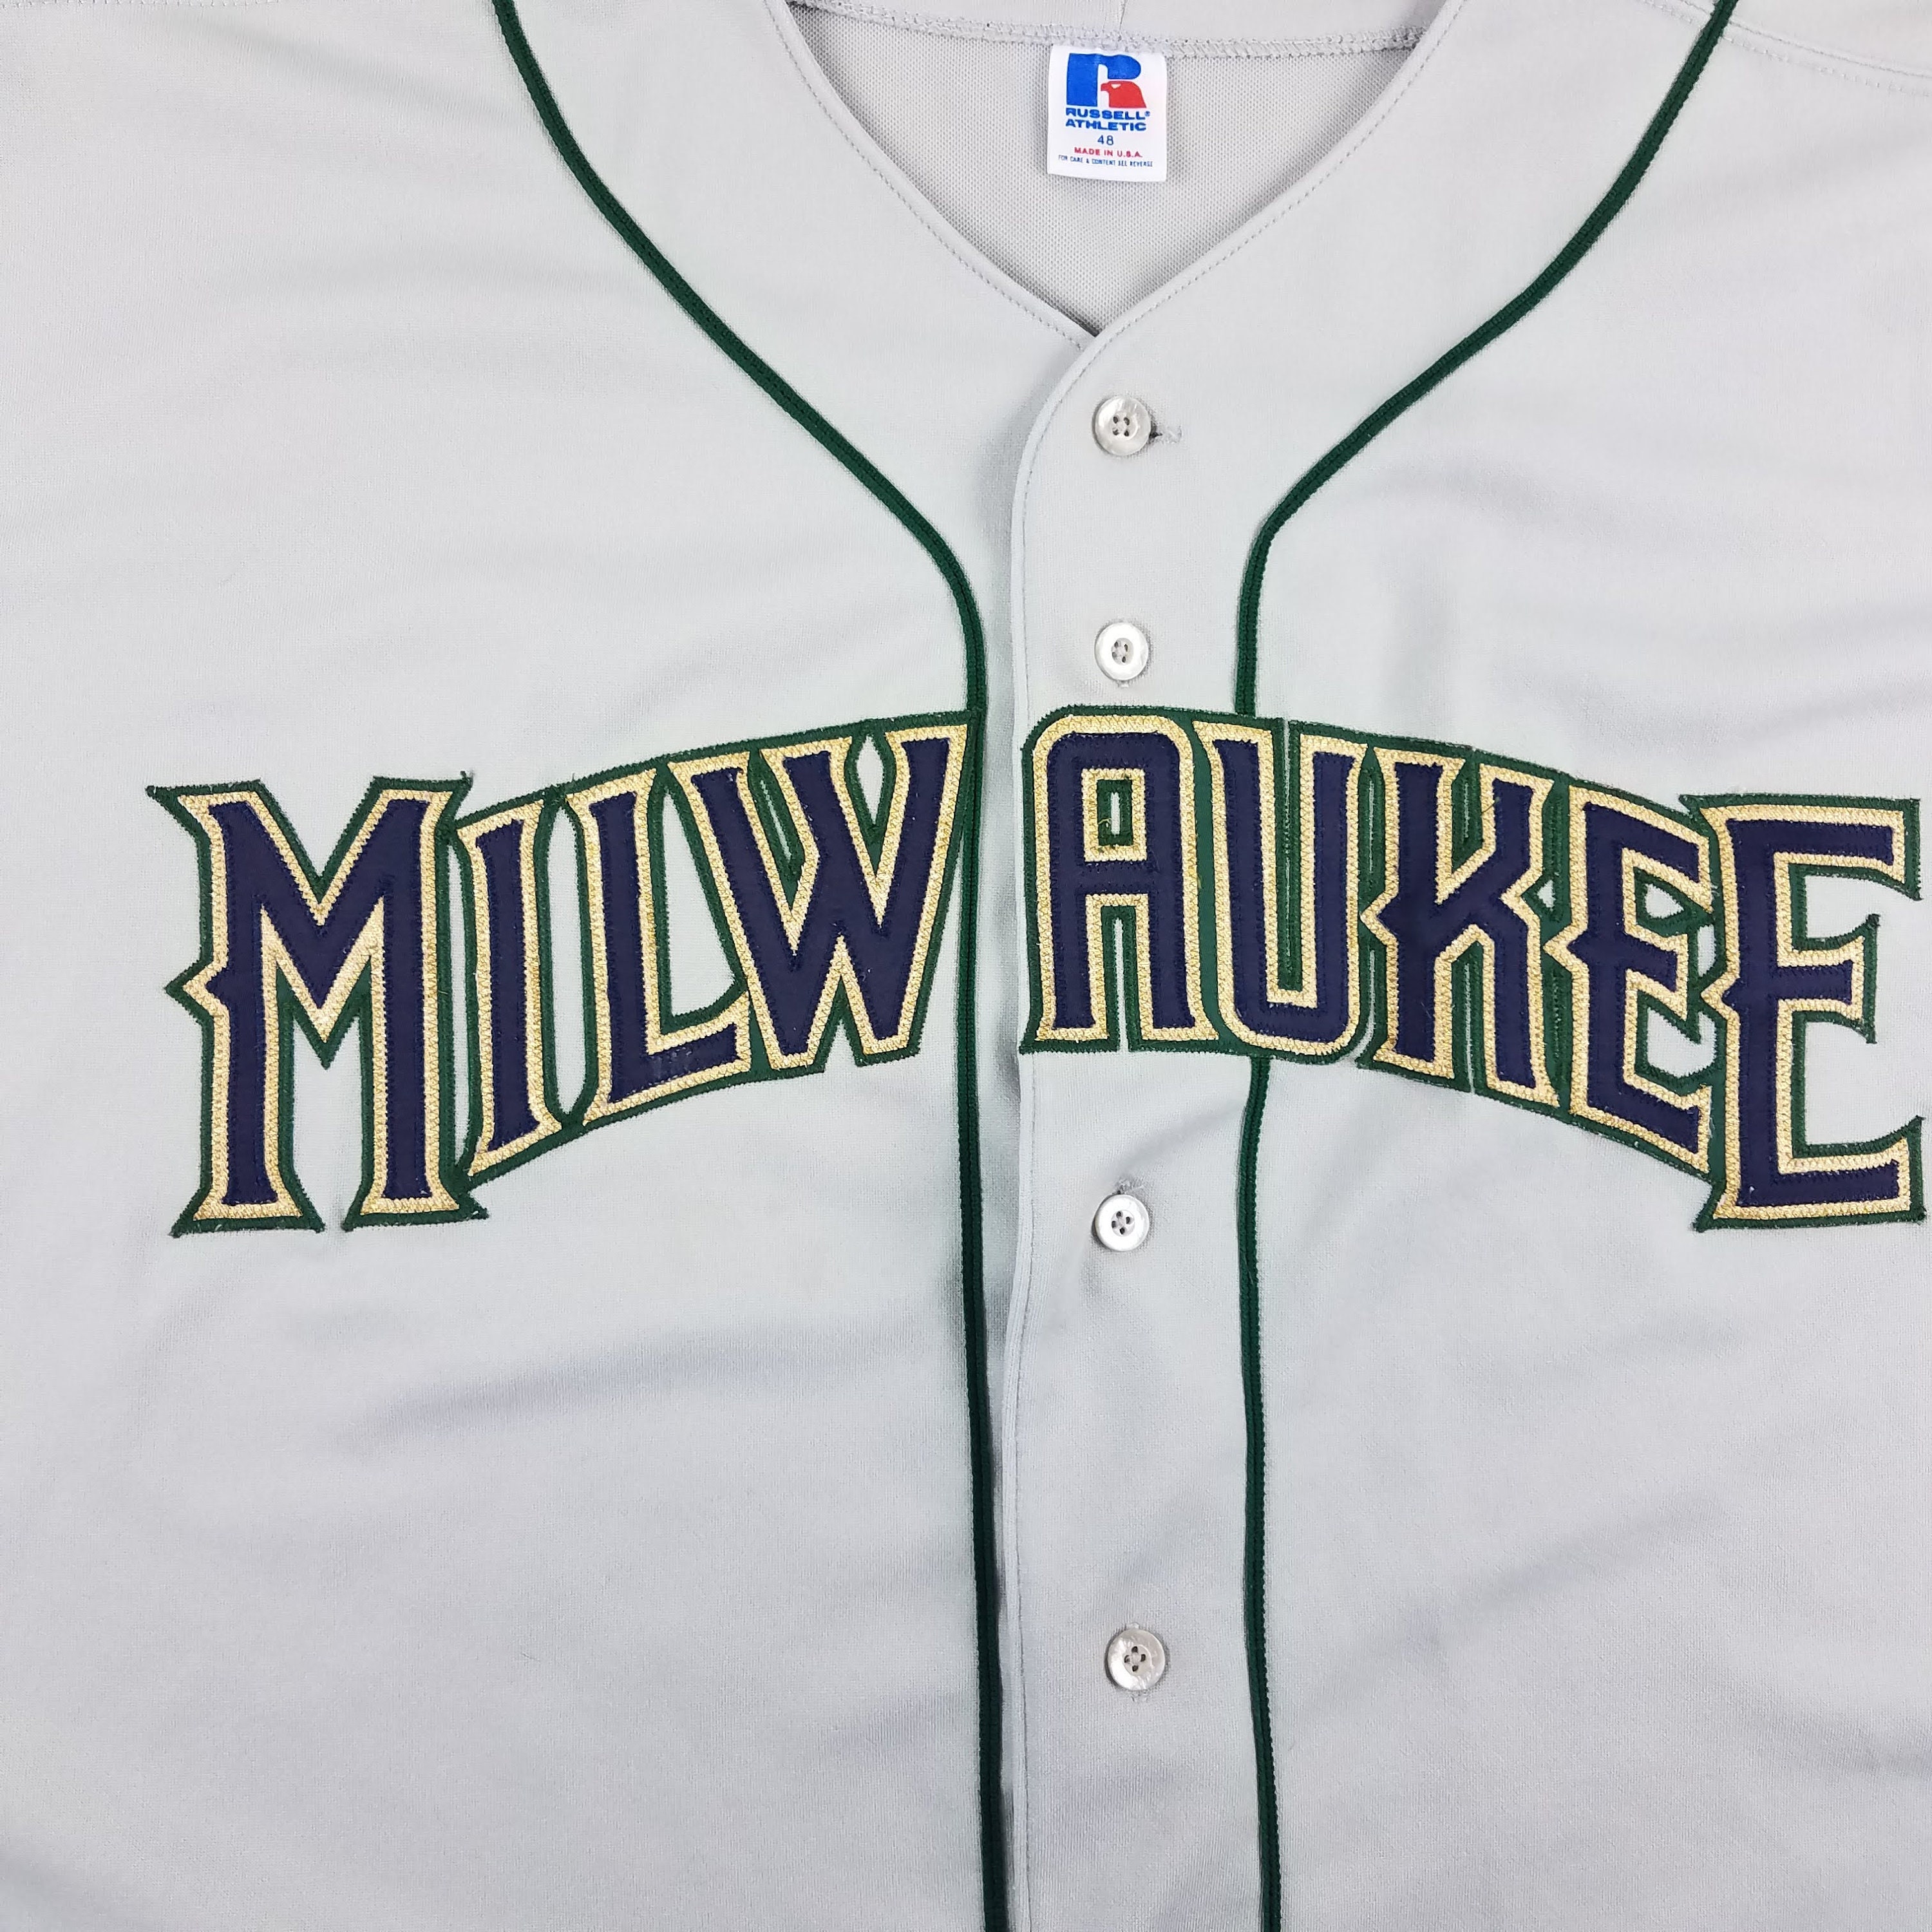 brewers 90s uniforms